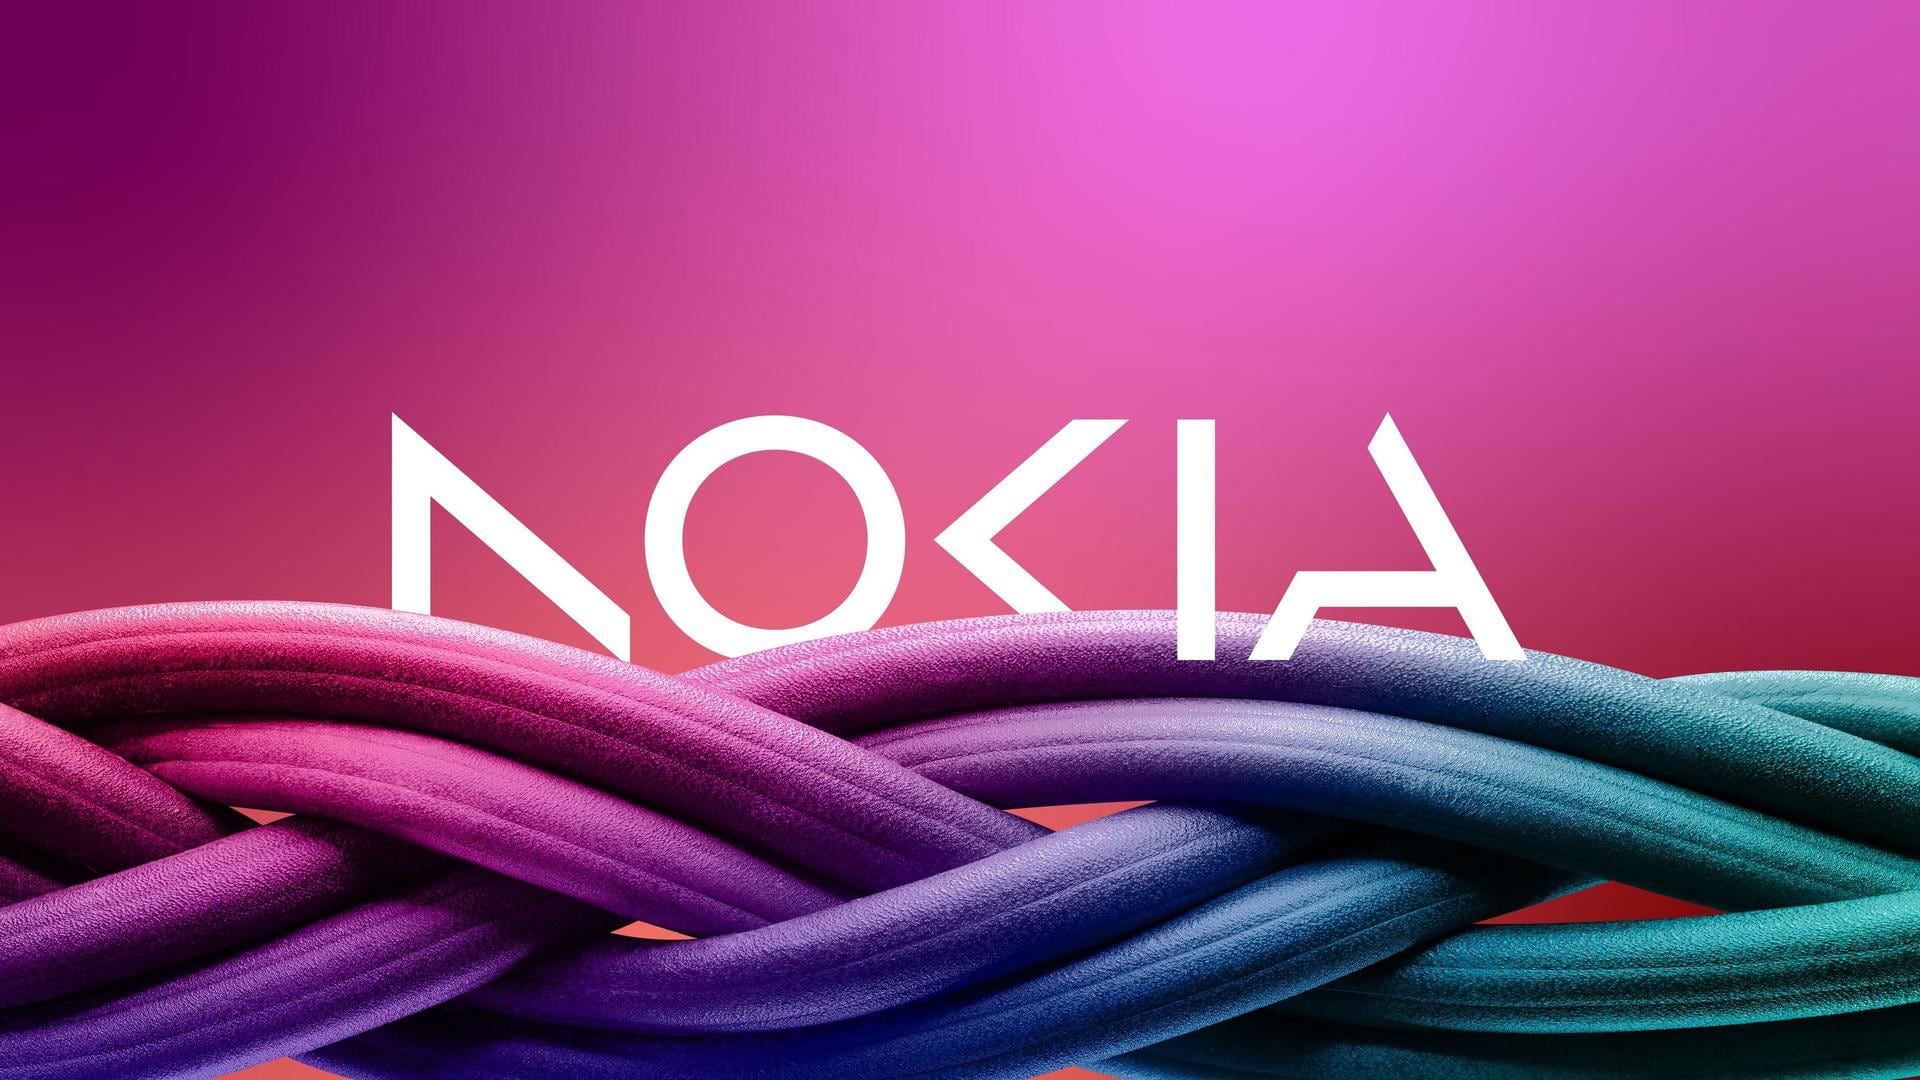 Apple Signs Another Multi-Year 5G Patent License Agreement With Nokia - macrumors.com